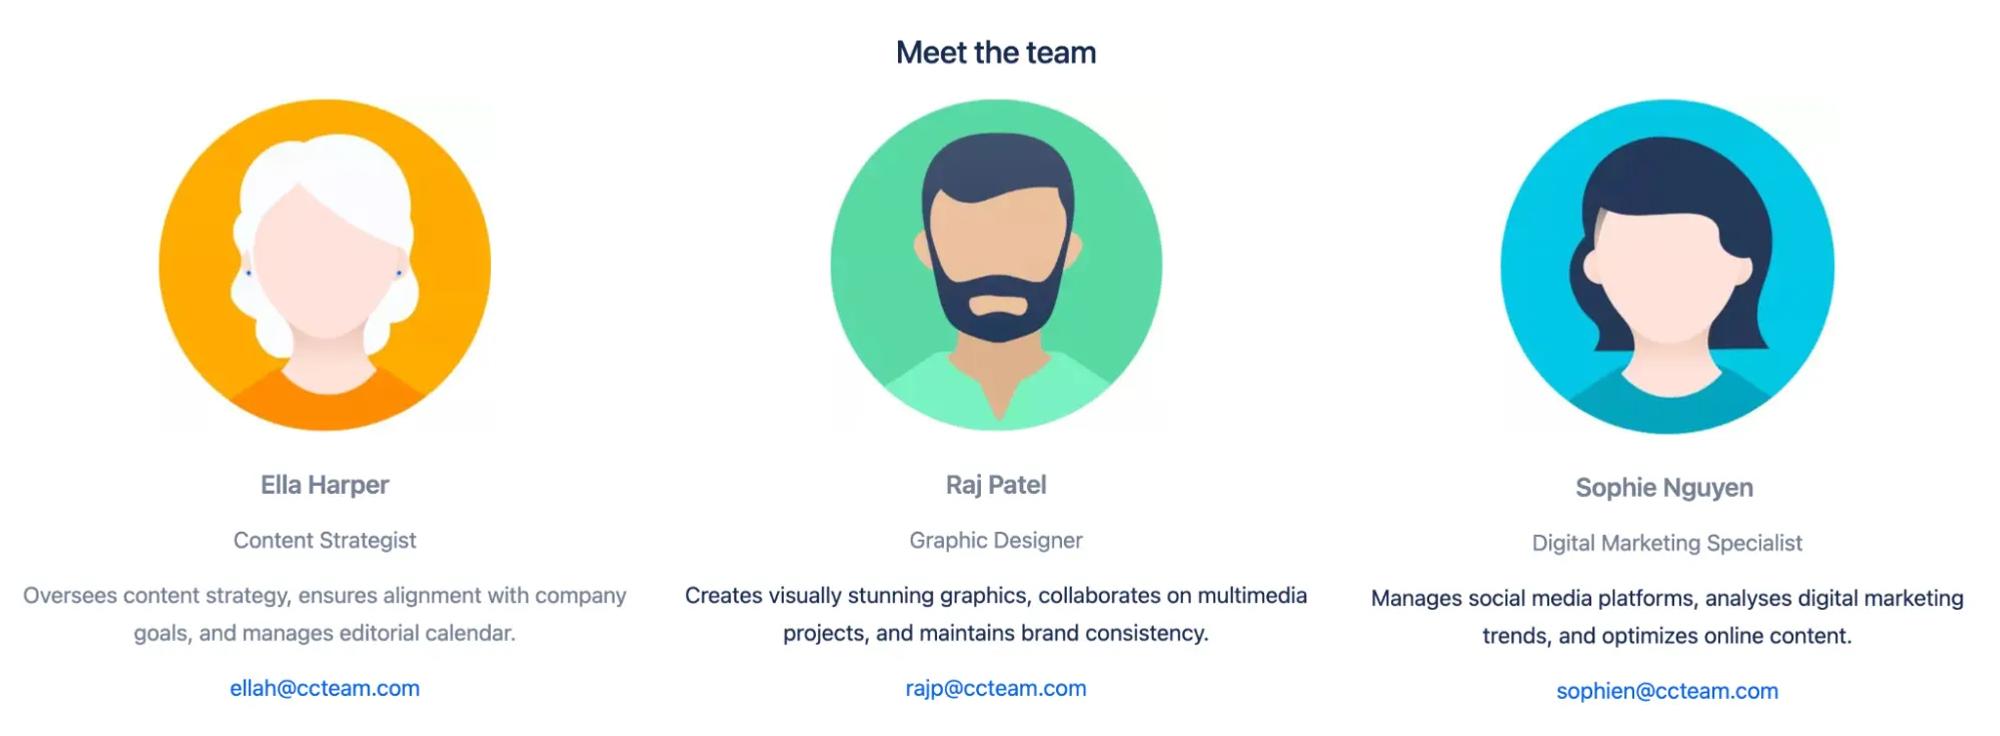 A 'Meet the team' section in Confluence with team member roles and their associated pictures